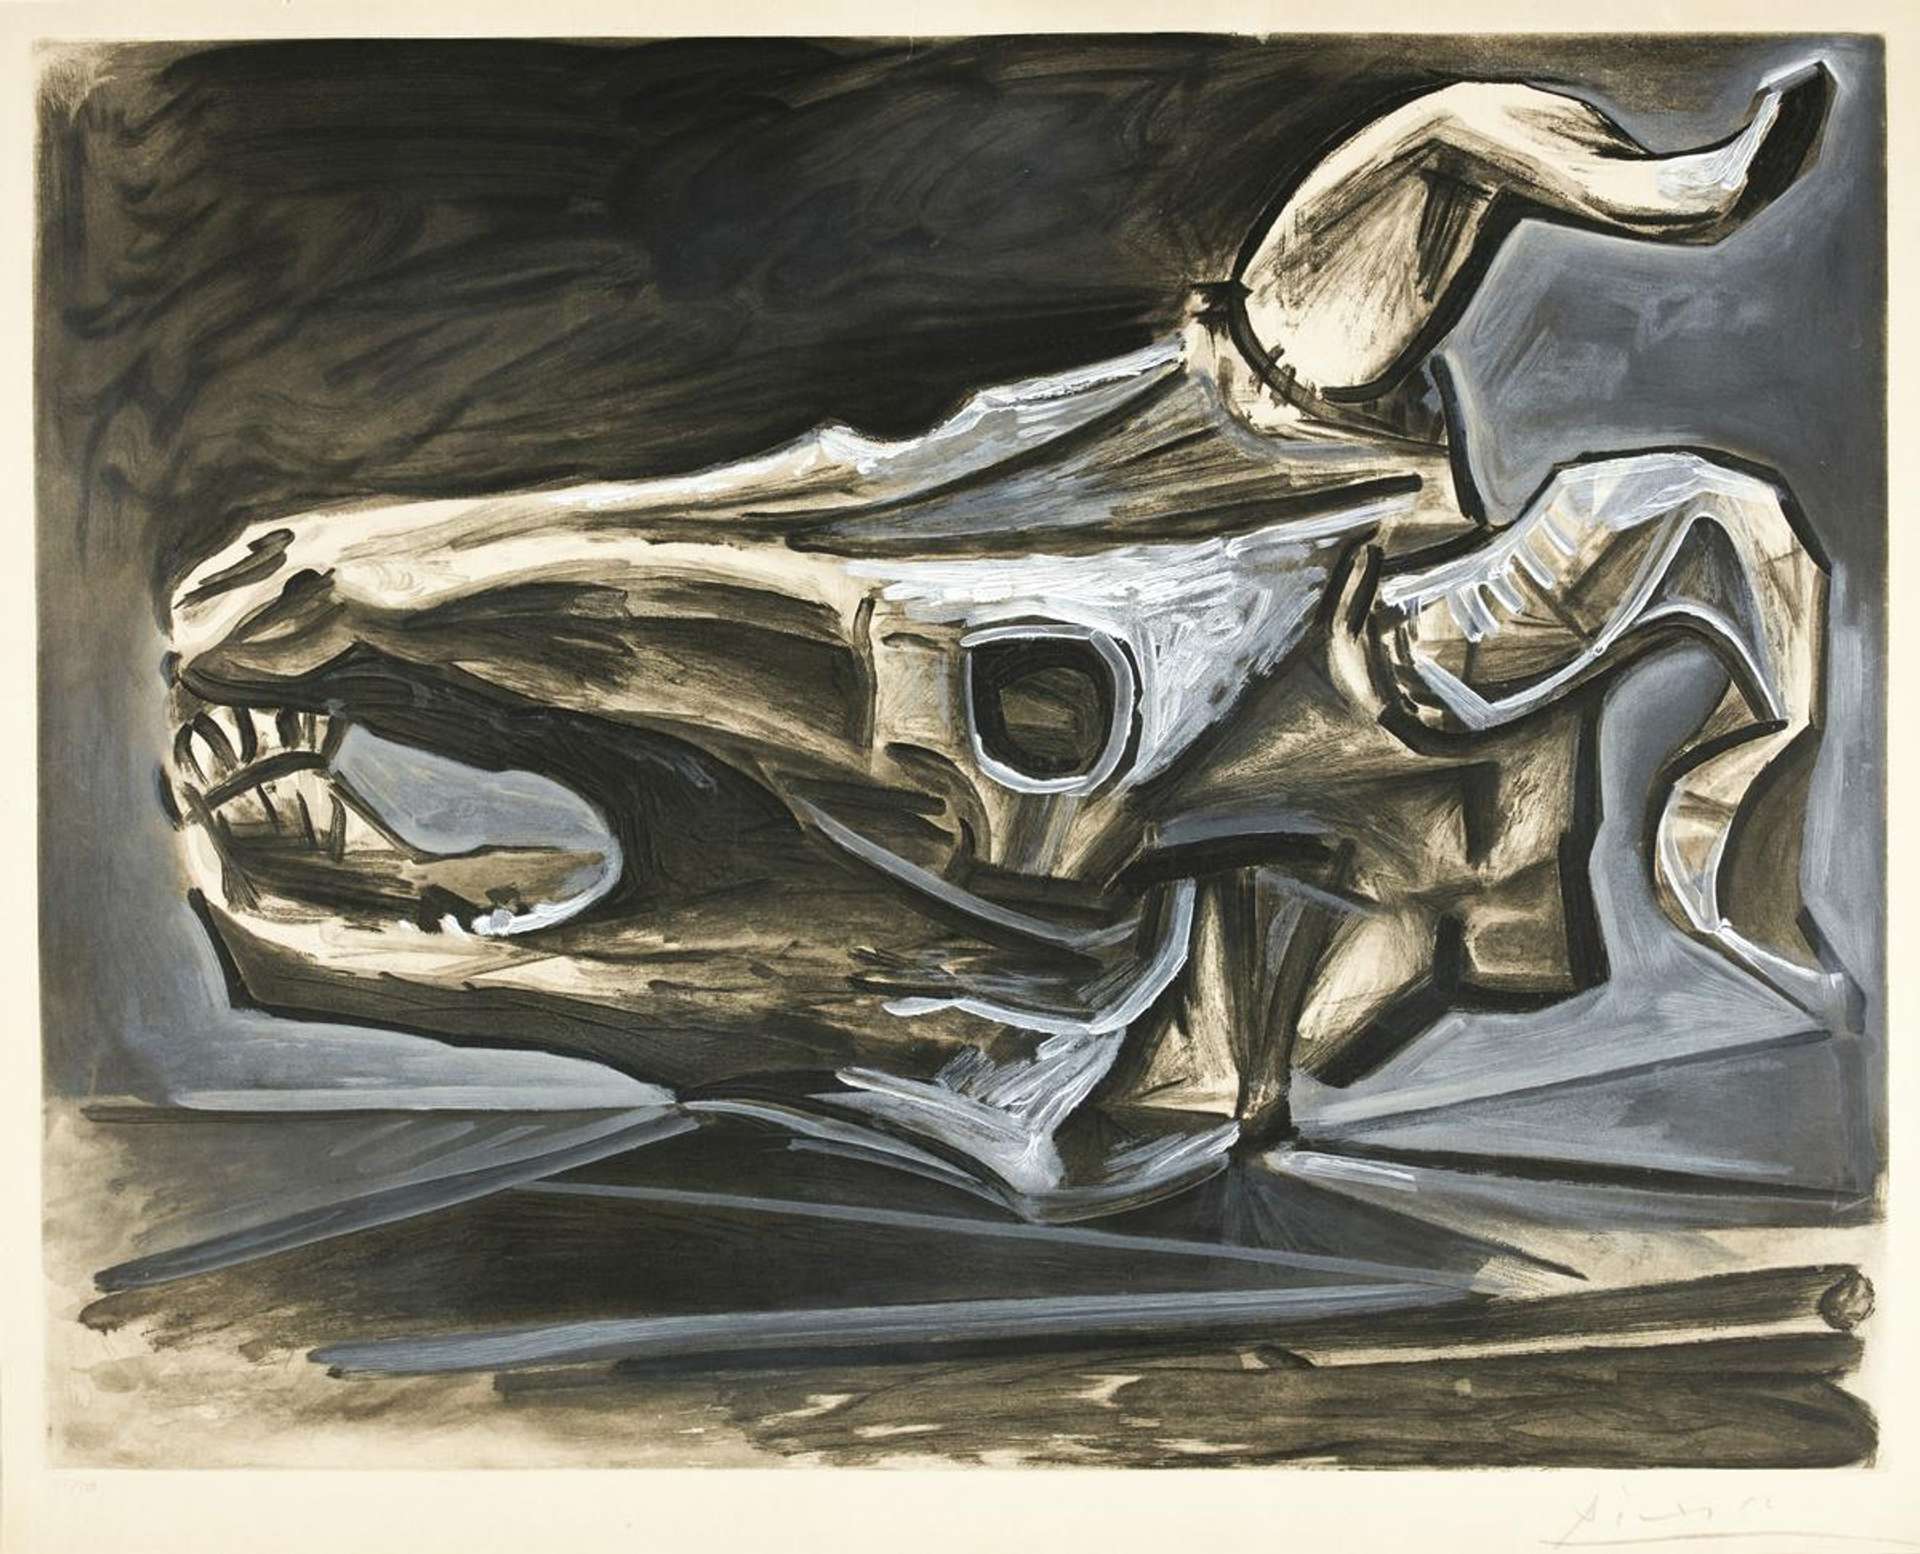 This print by Pablo Picasso shows a goat's skull over a table, done in a muted colour palette.